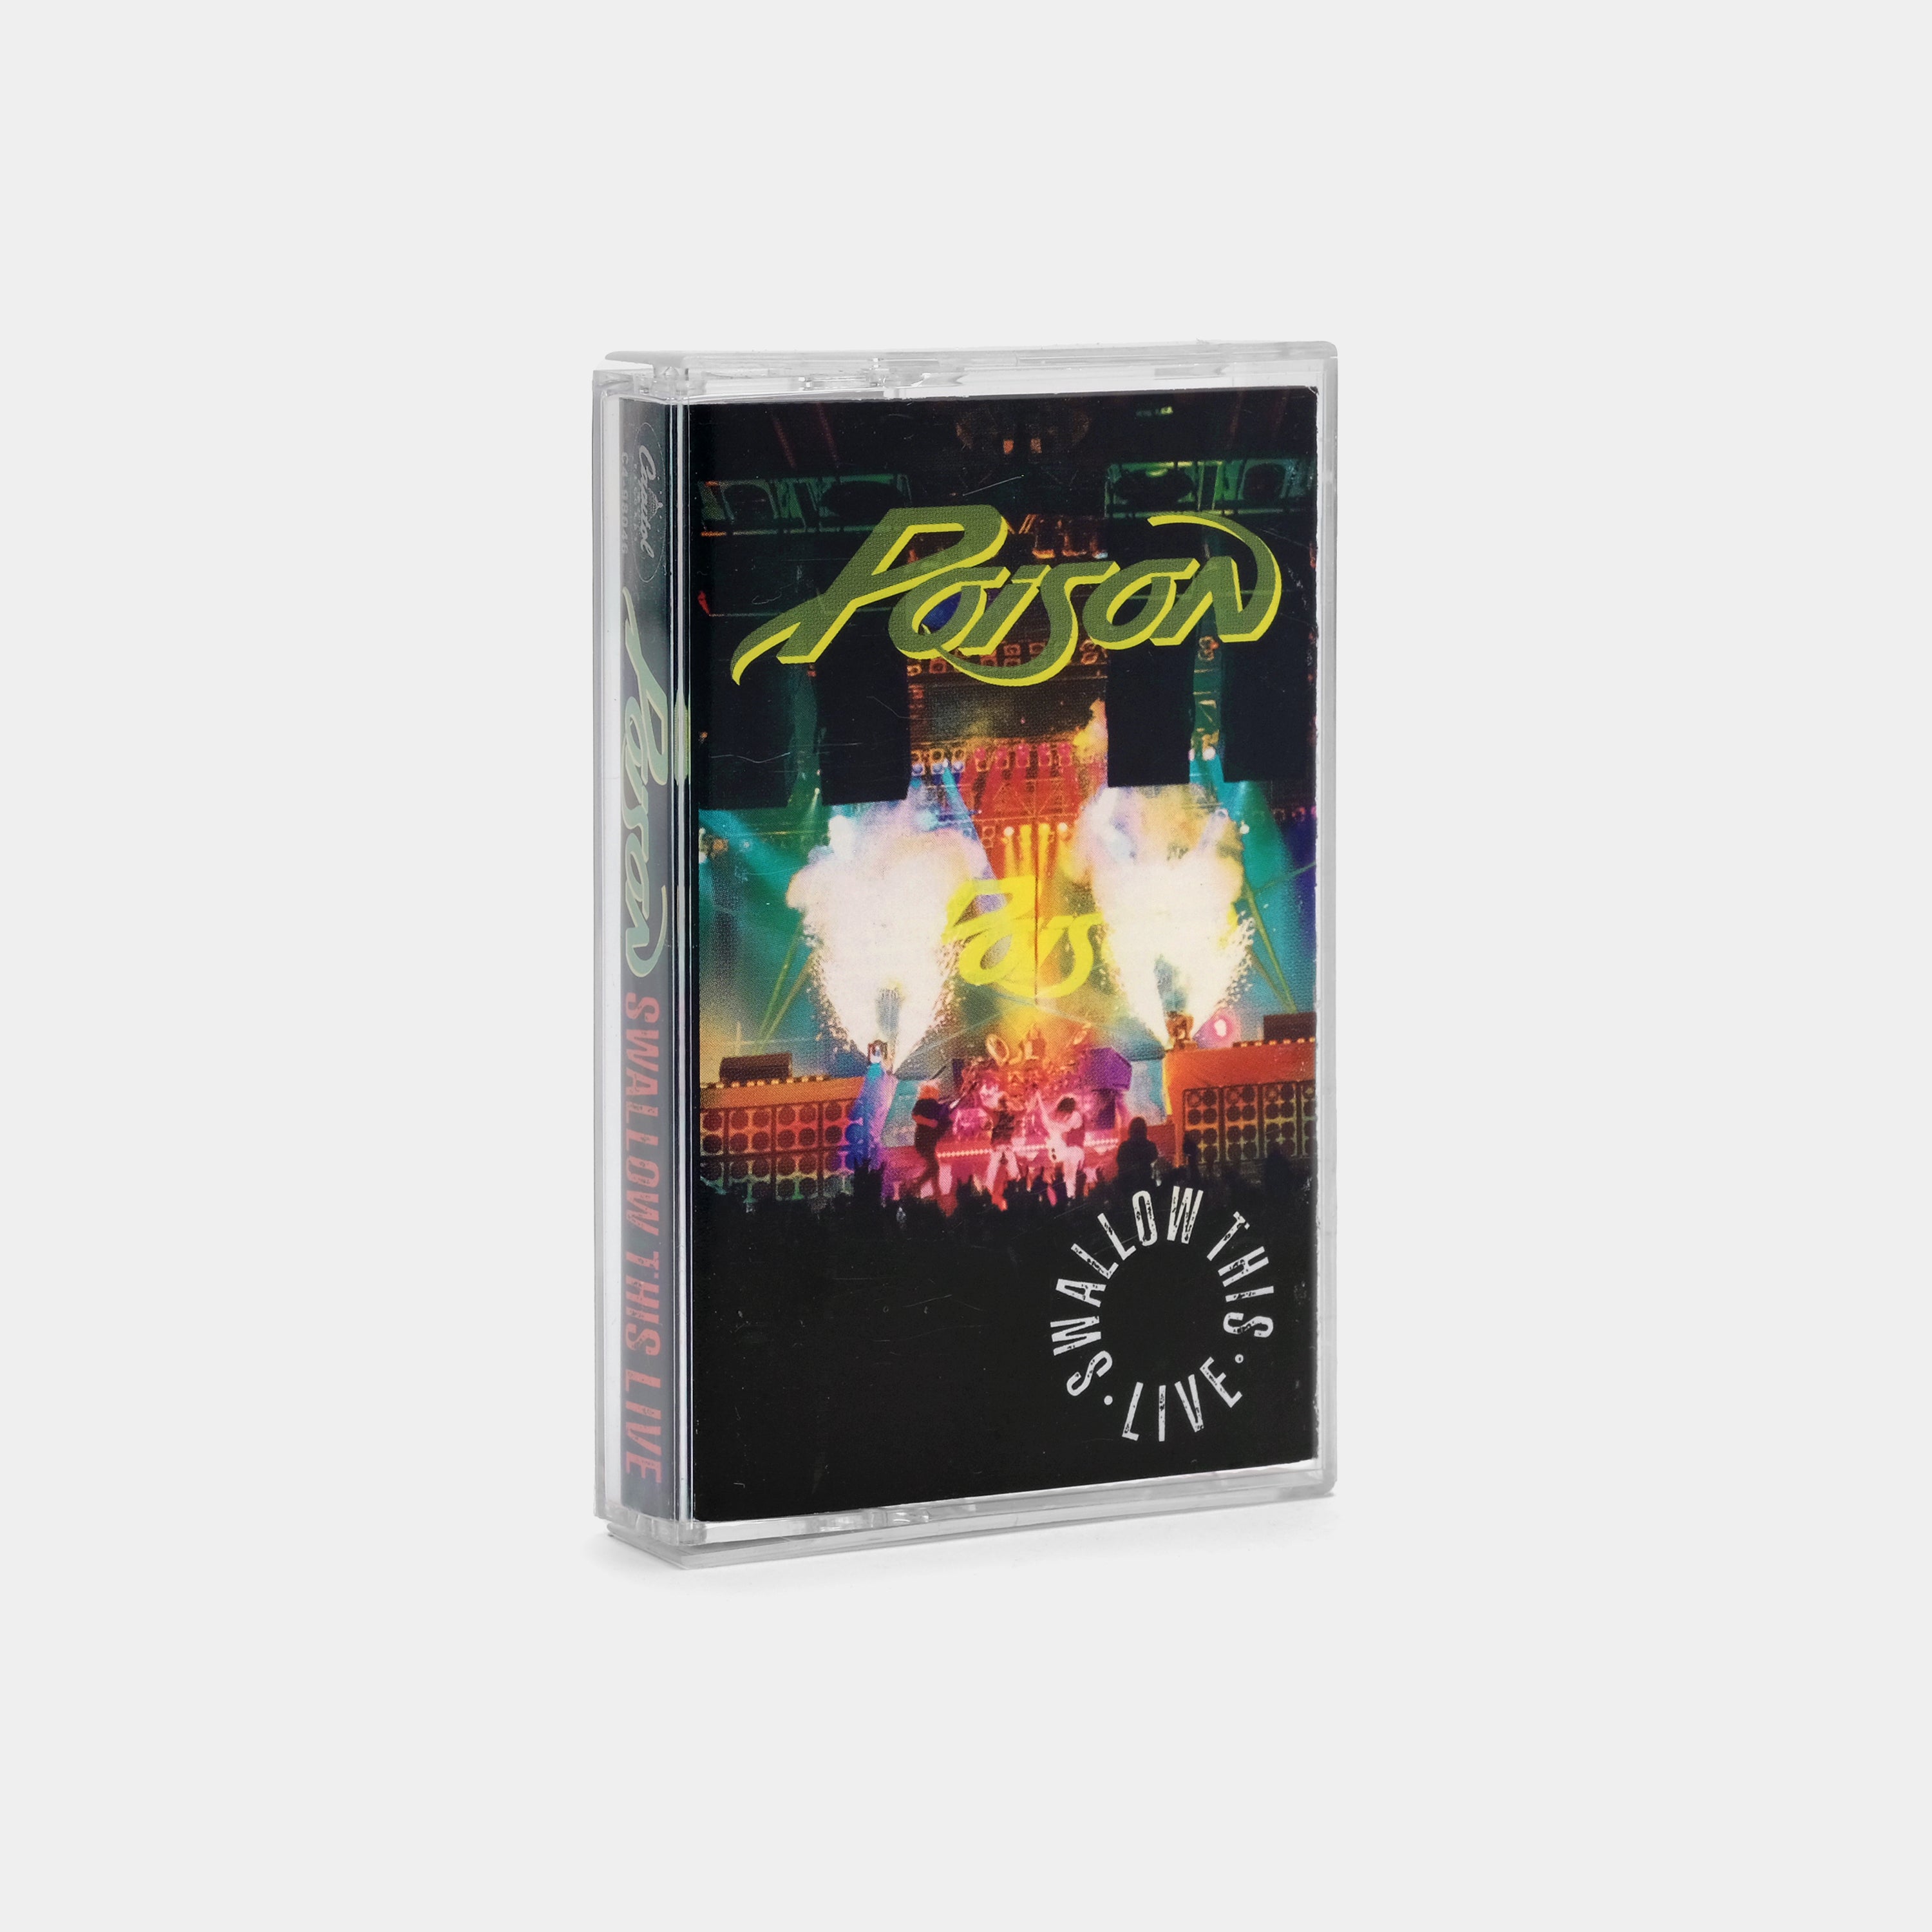 Poison - Swallow This Live Cassette Tape